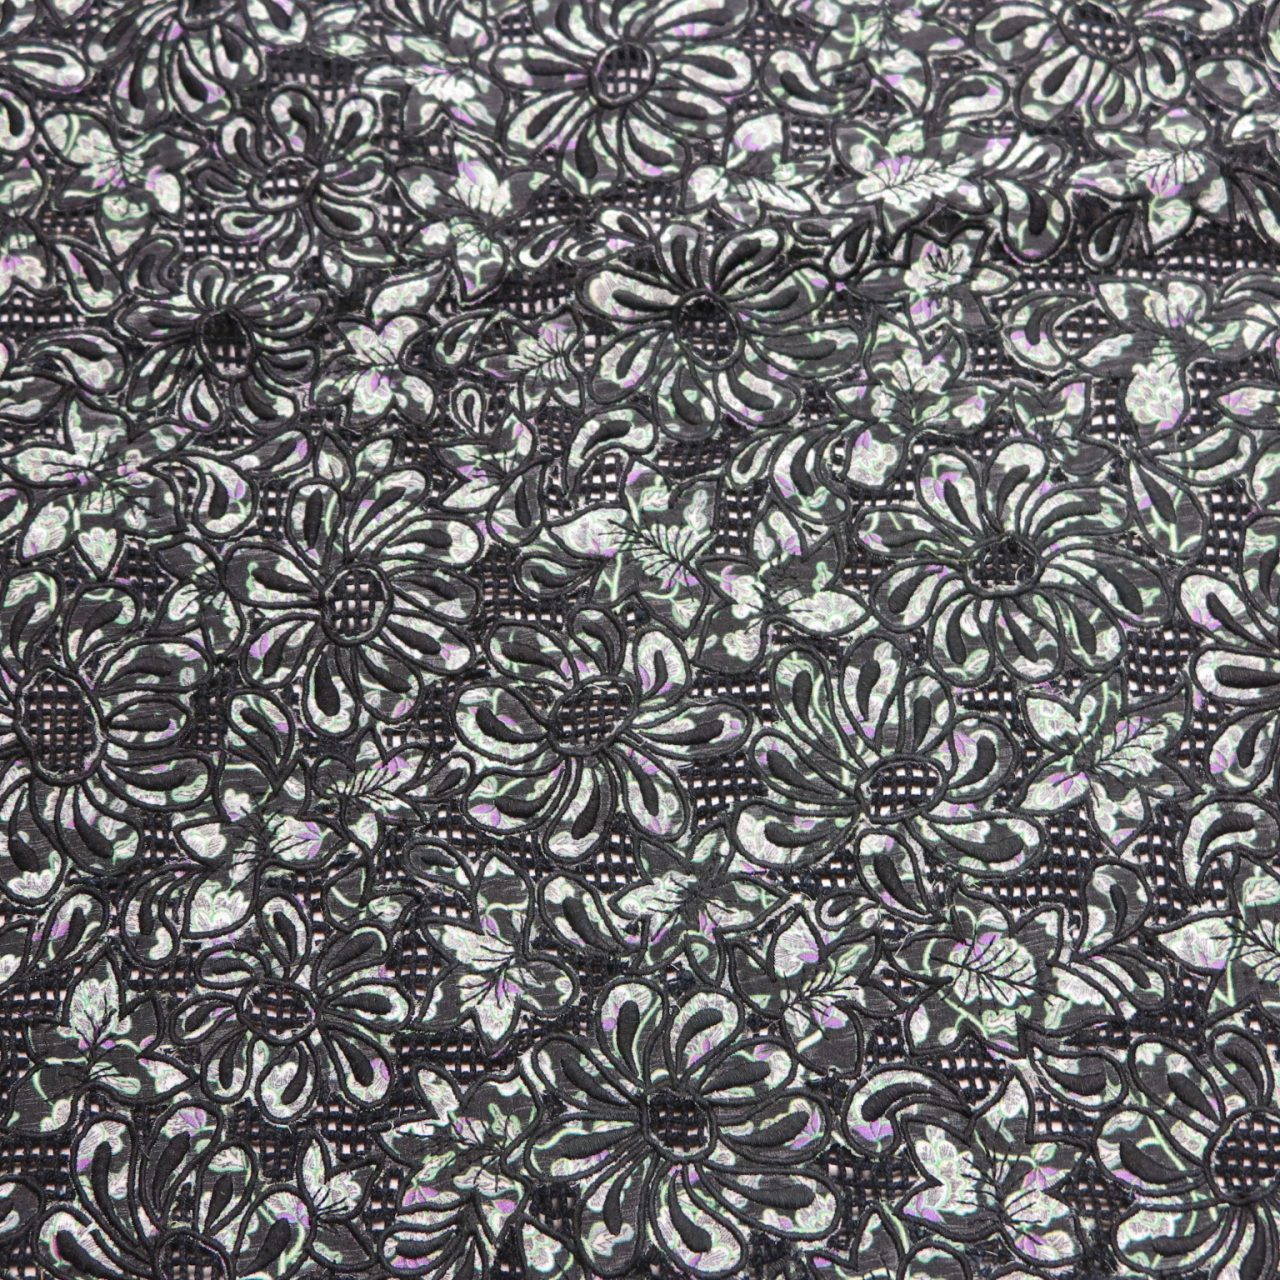 Cotton Netting Fabric with Lifted Floral Pattern • Promenade Fine Fabrics